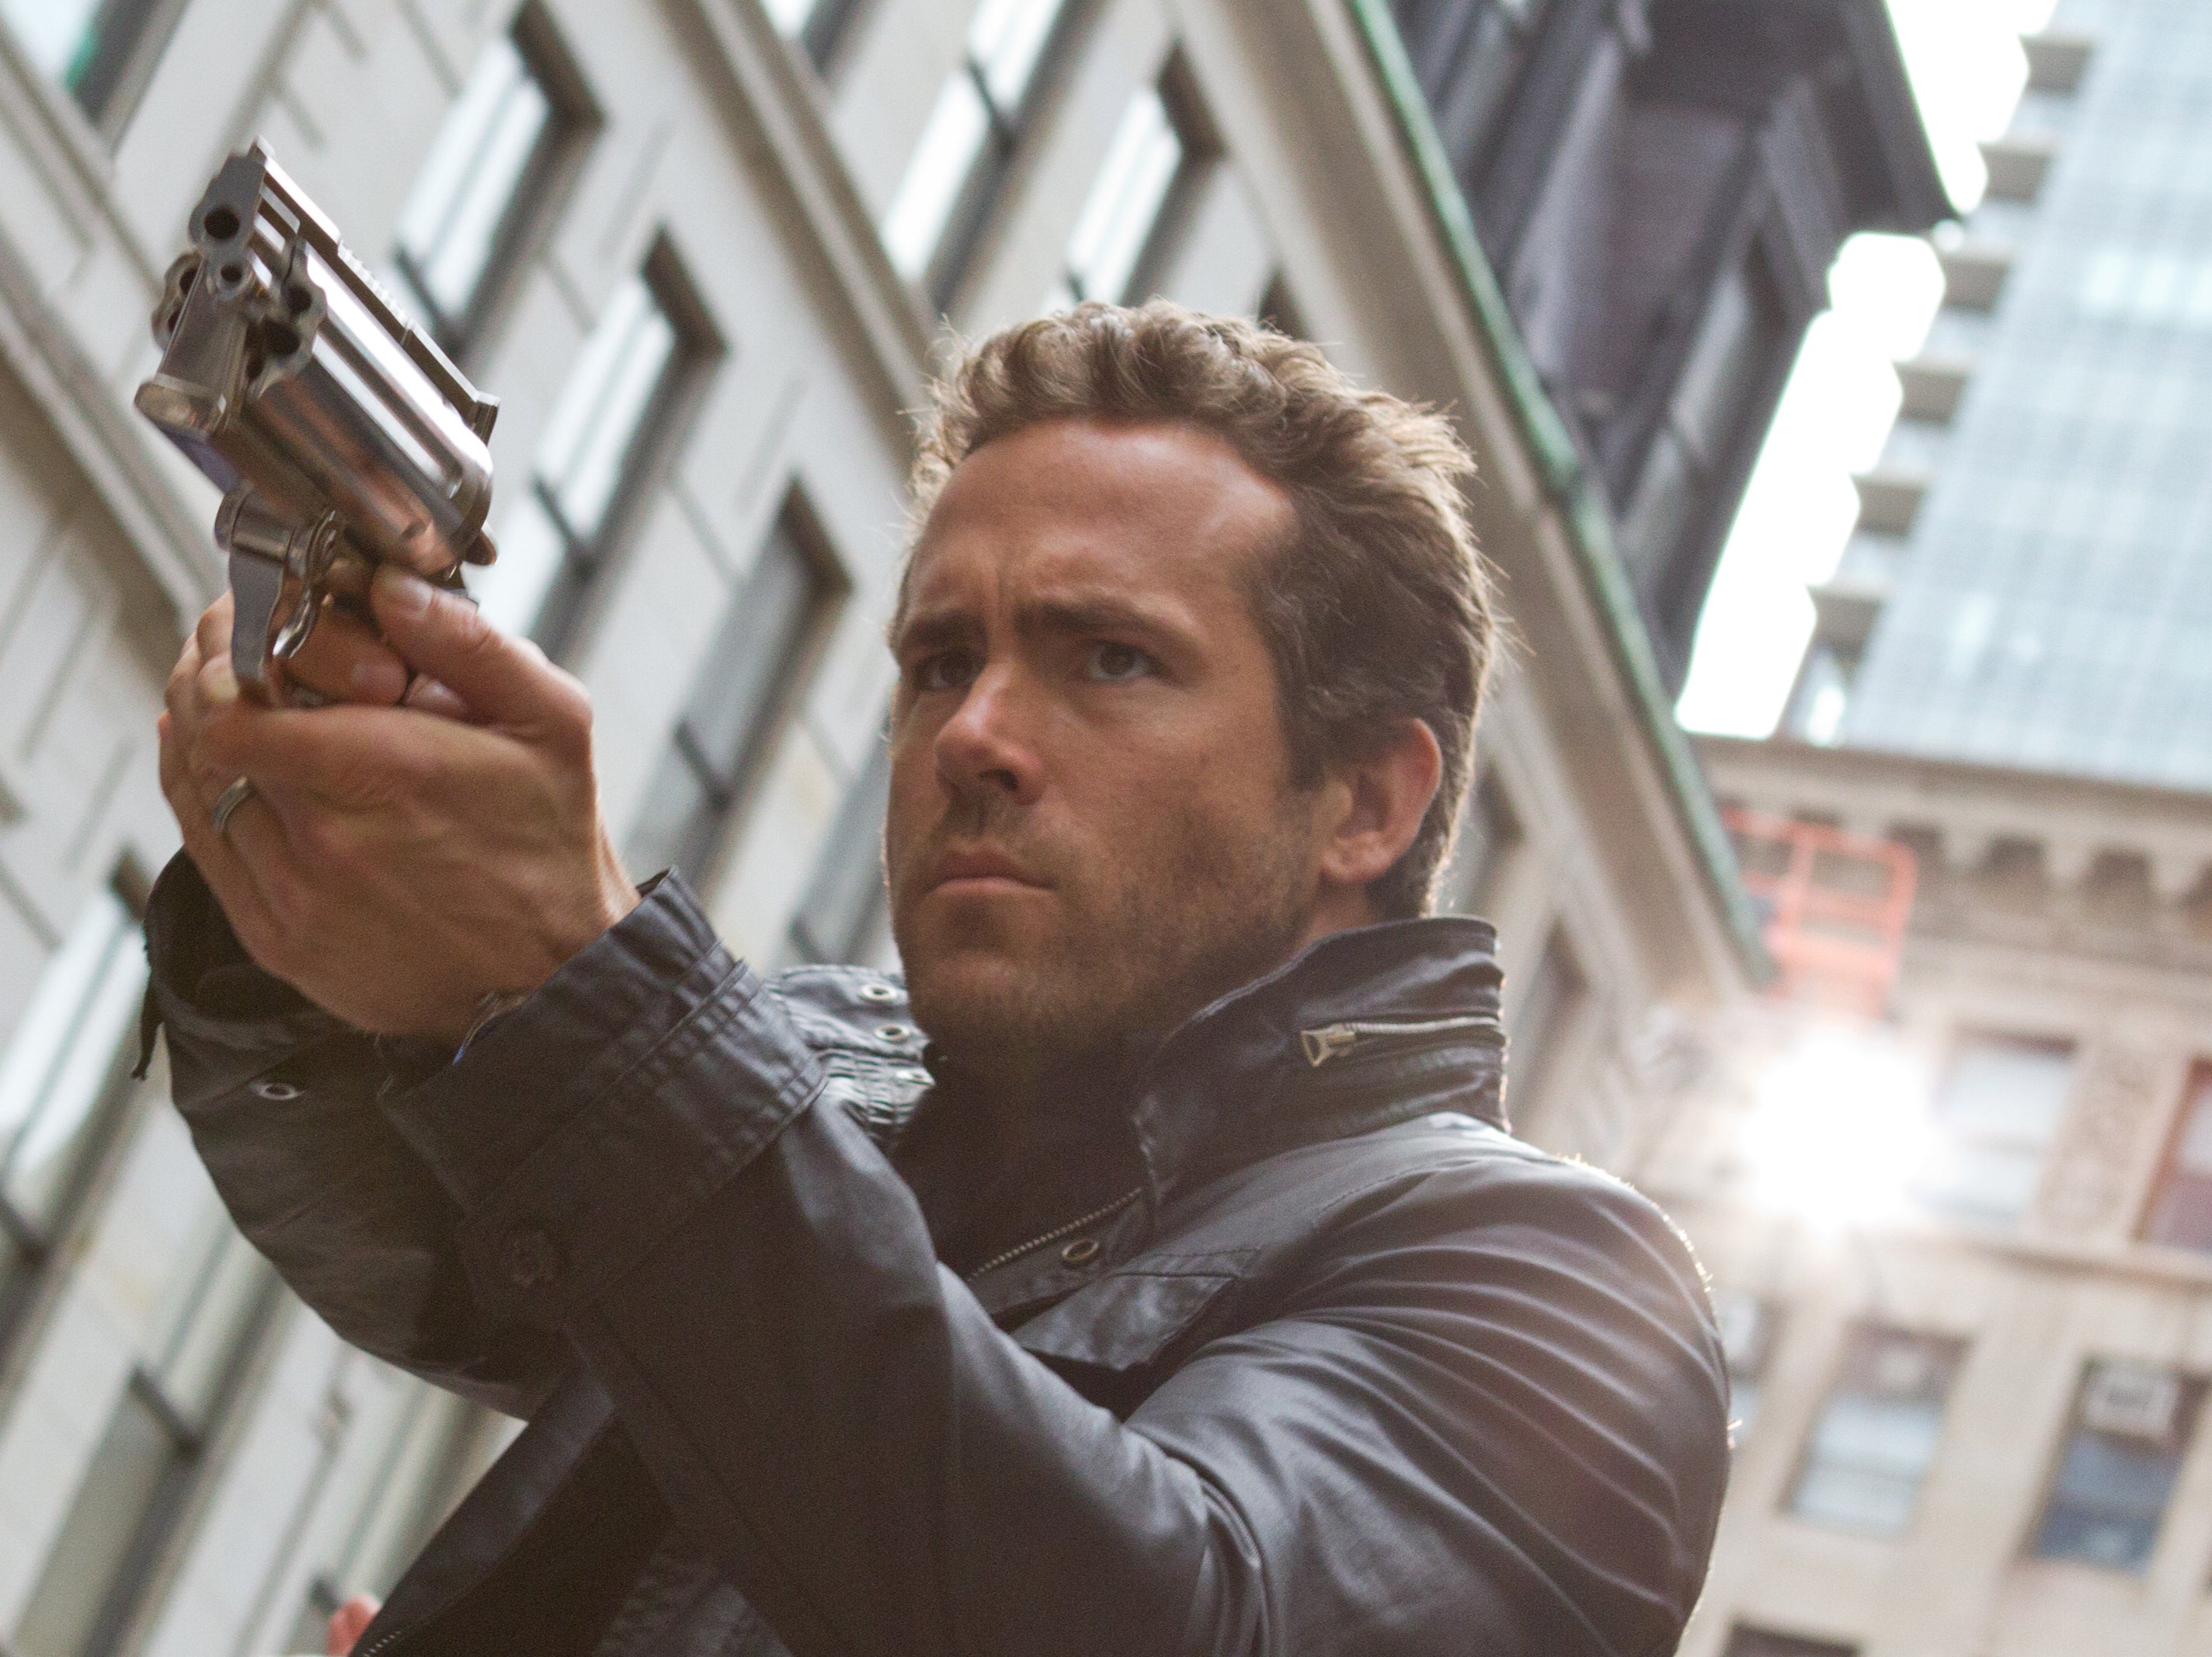 2013's R.I.P.D. - One of the Worst Ryan Reynolds Movies Ever, Is